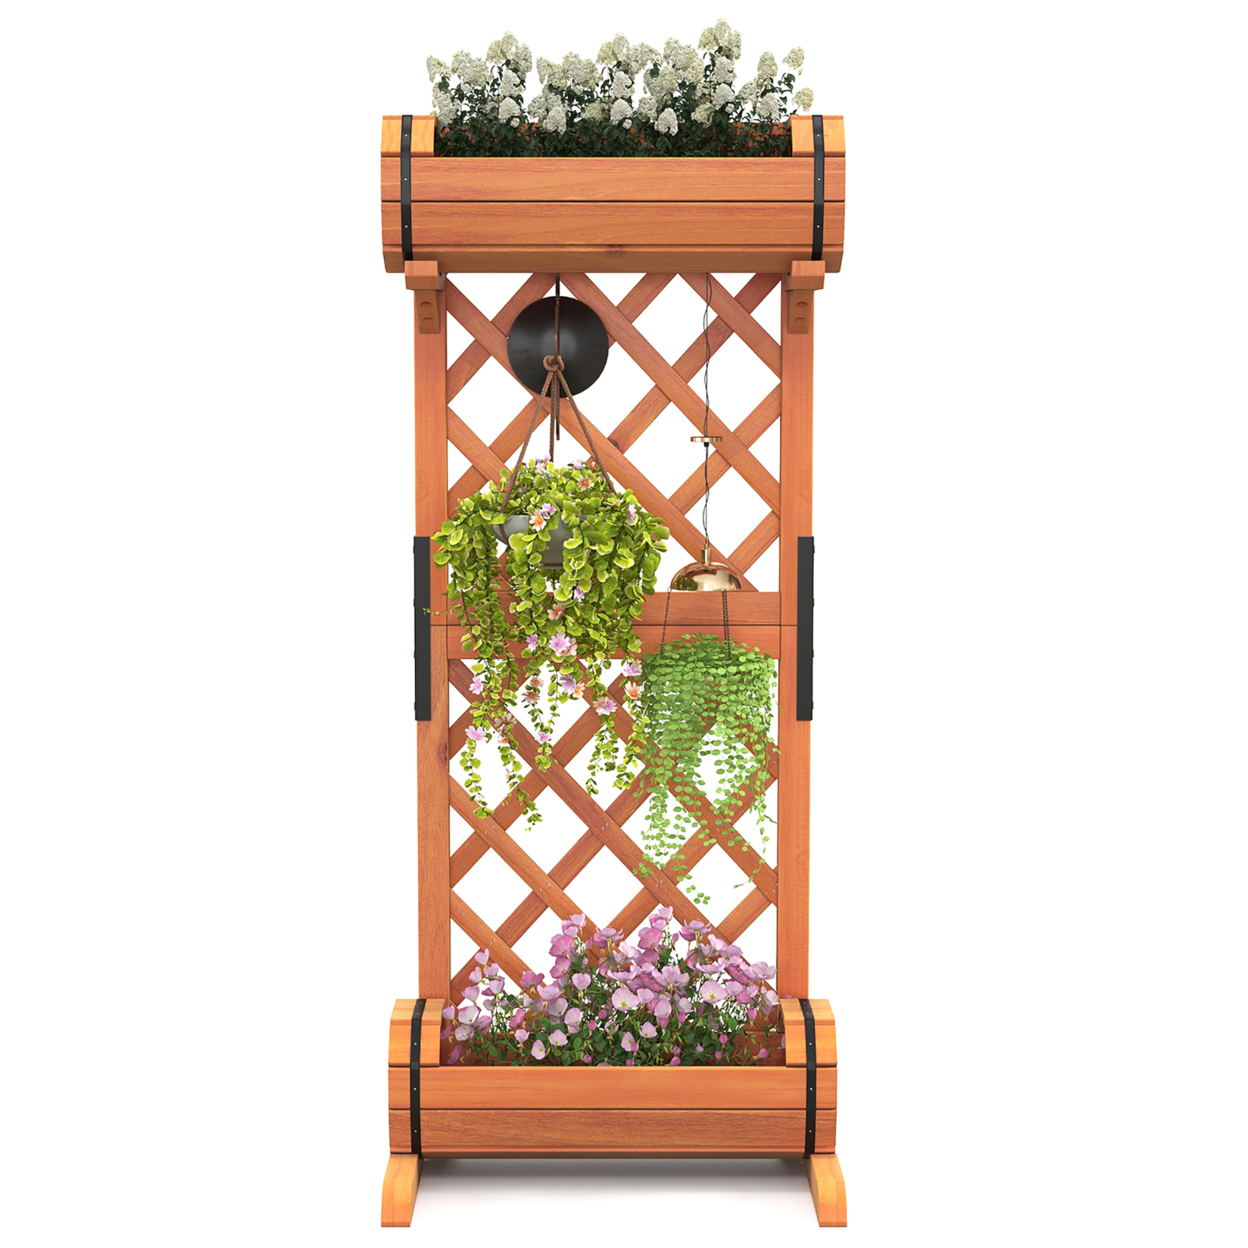 2-Tier Raised Planter Garden Wooden Bed W/ 2 Cylindrical Planter Boxes